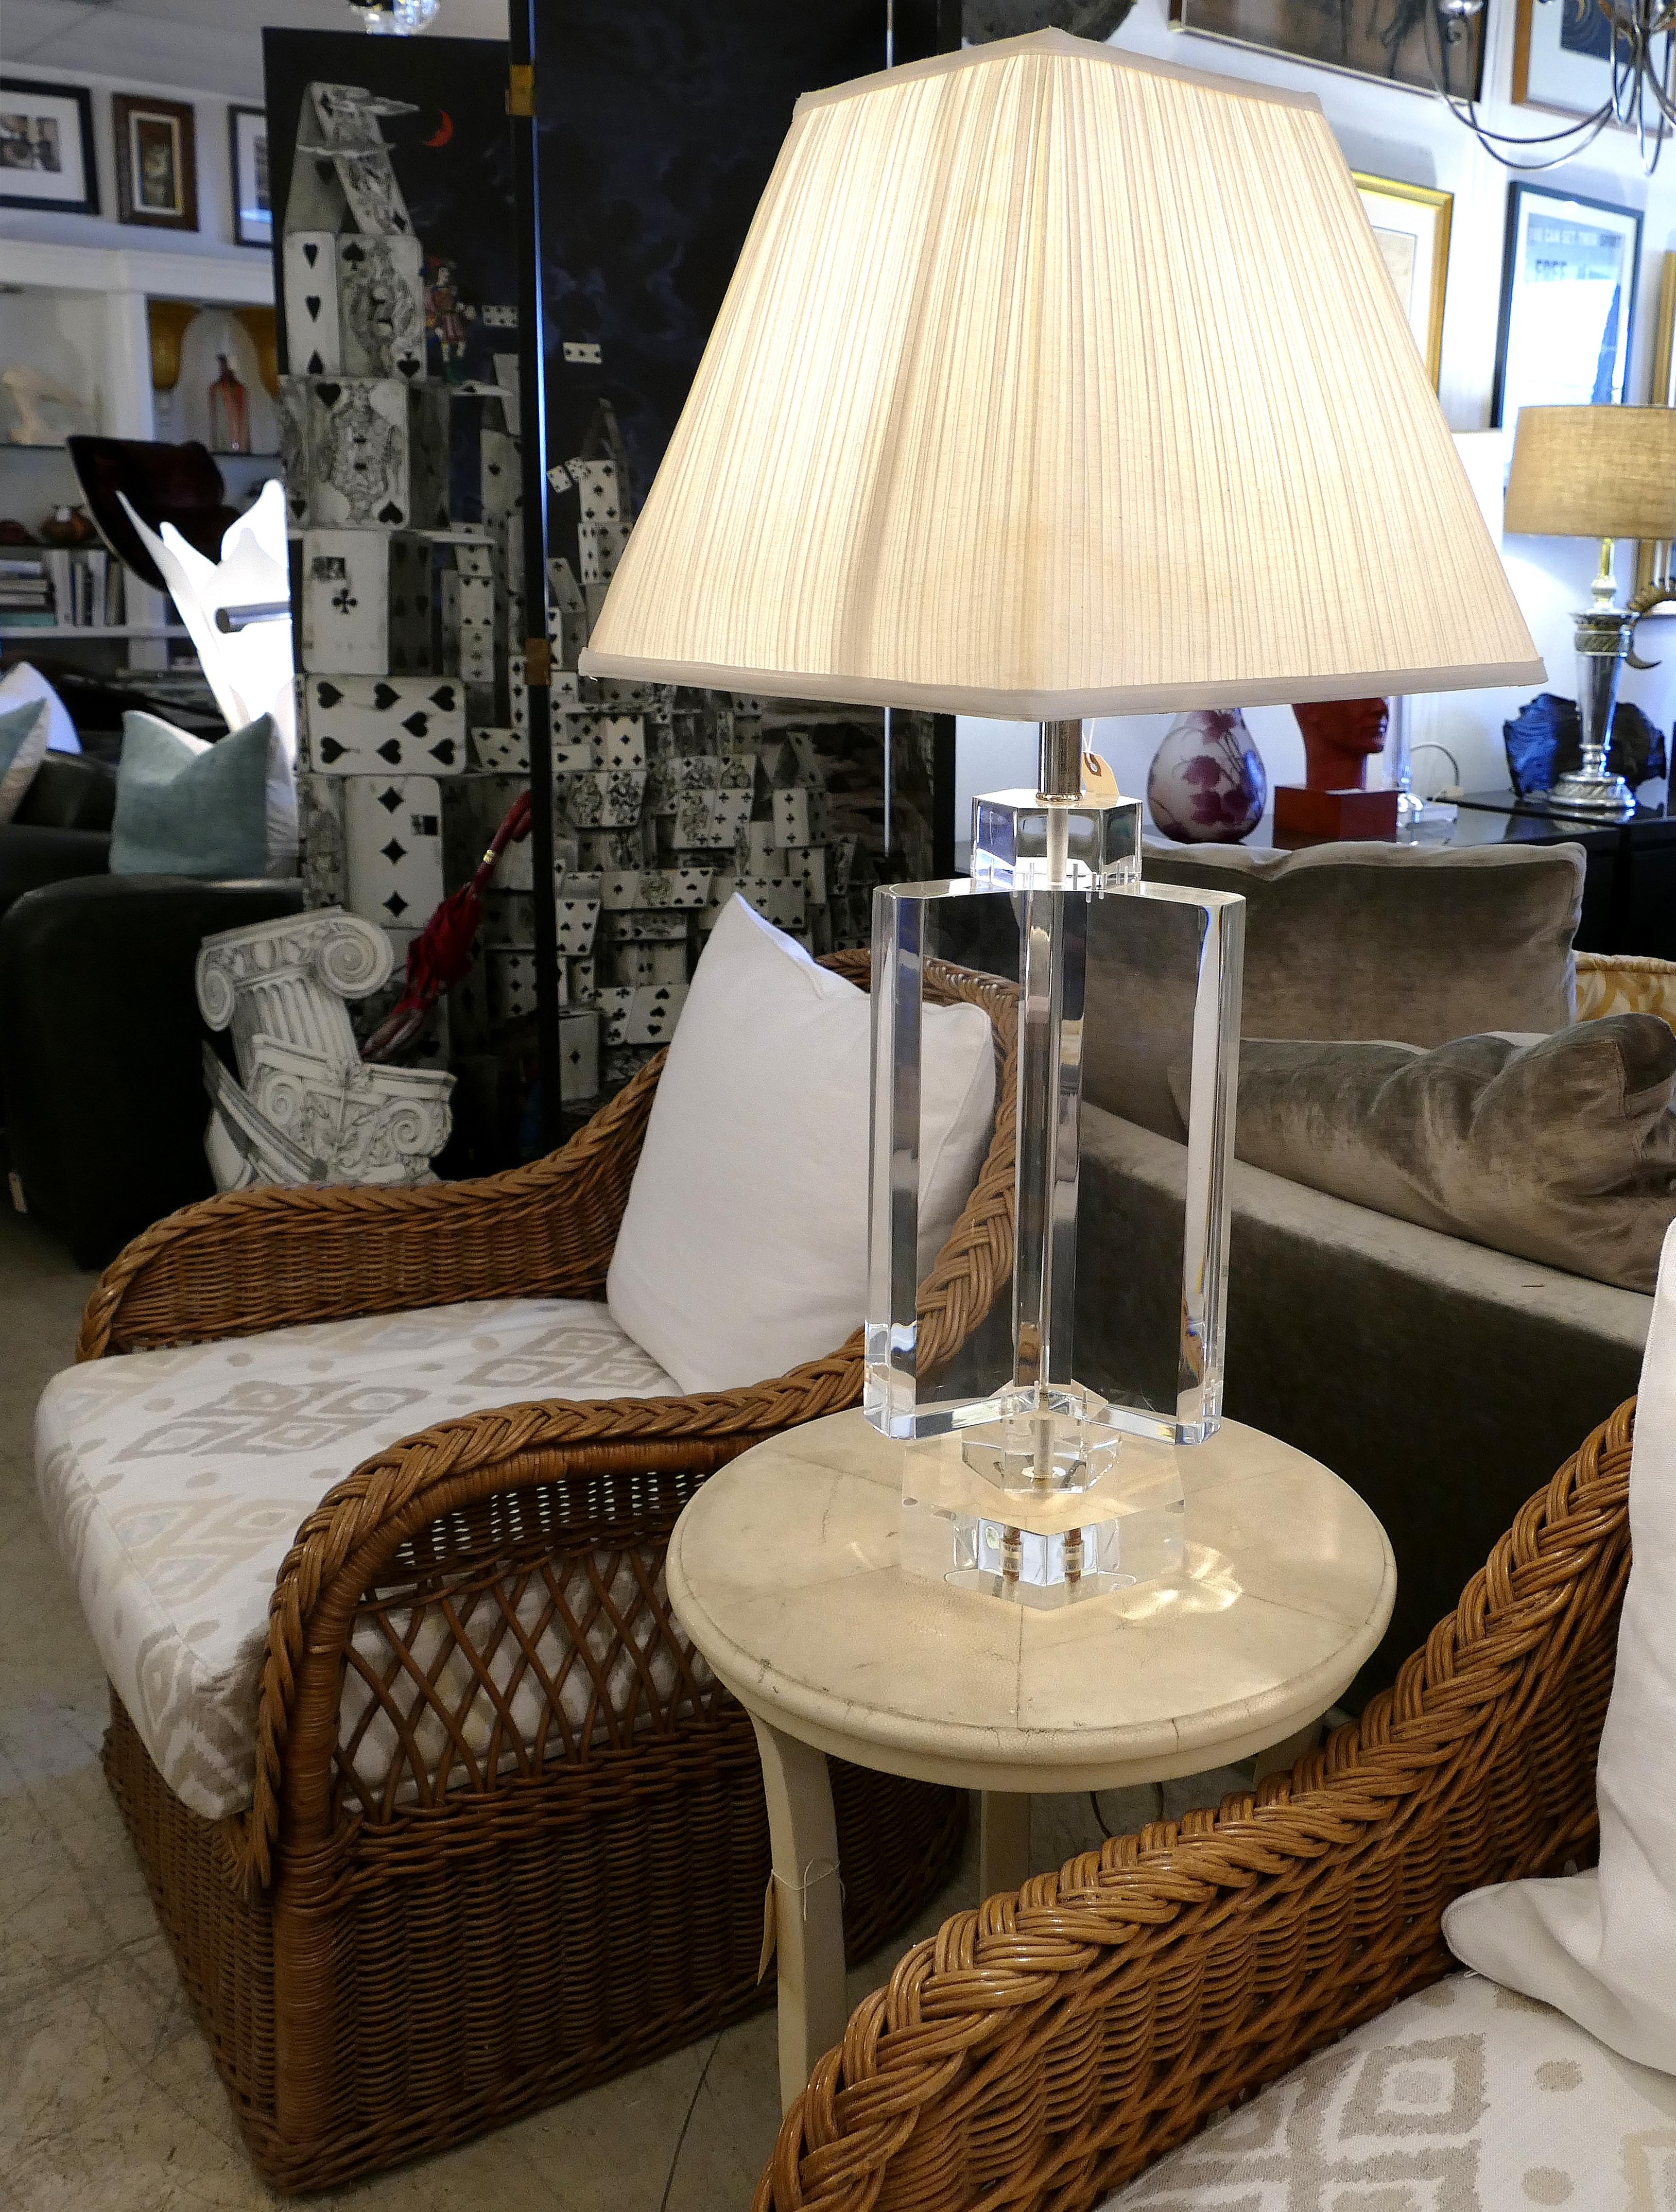 Chunky, Heavy Vintage Karl Springer Style Lucite Table Lamp

Offered for sale is a recent acquisition from a Miami Beach estate. This large and heavy vintage Lucite table lamp would make a wonderful addition to your mid-century modern decor. The